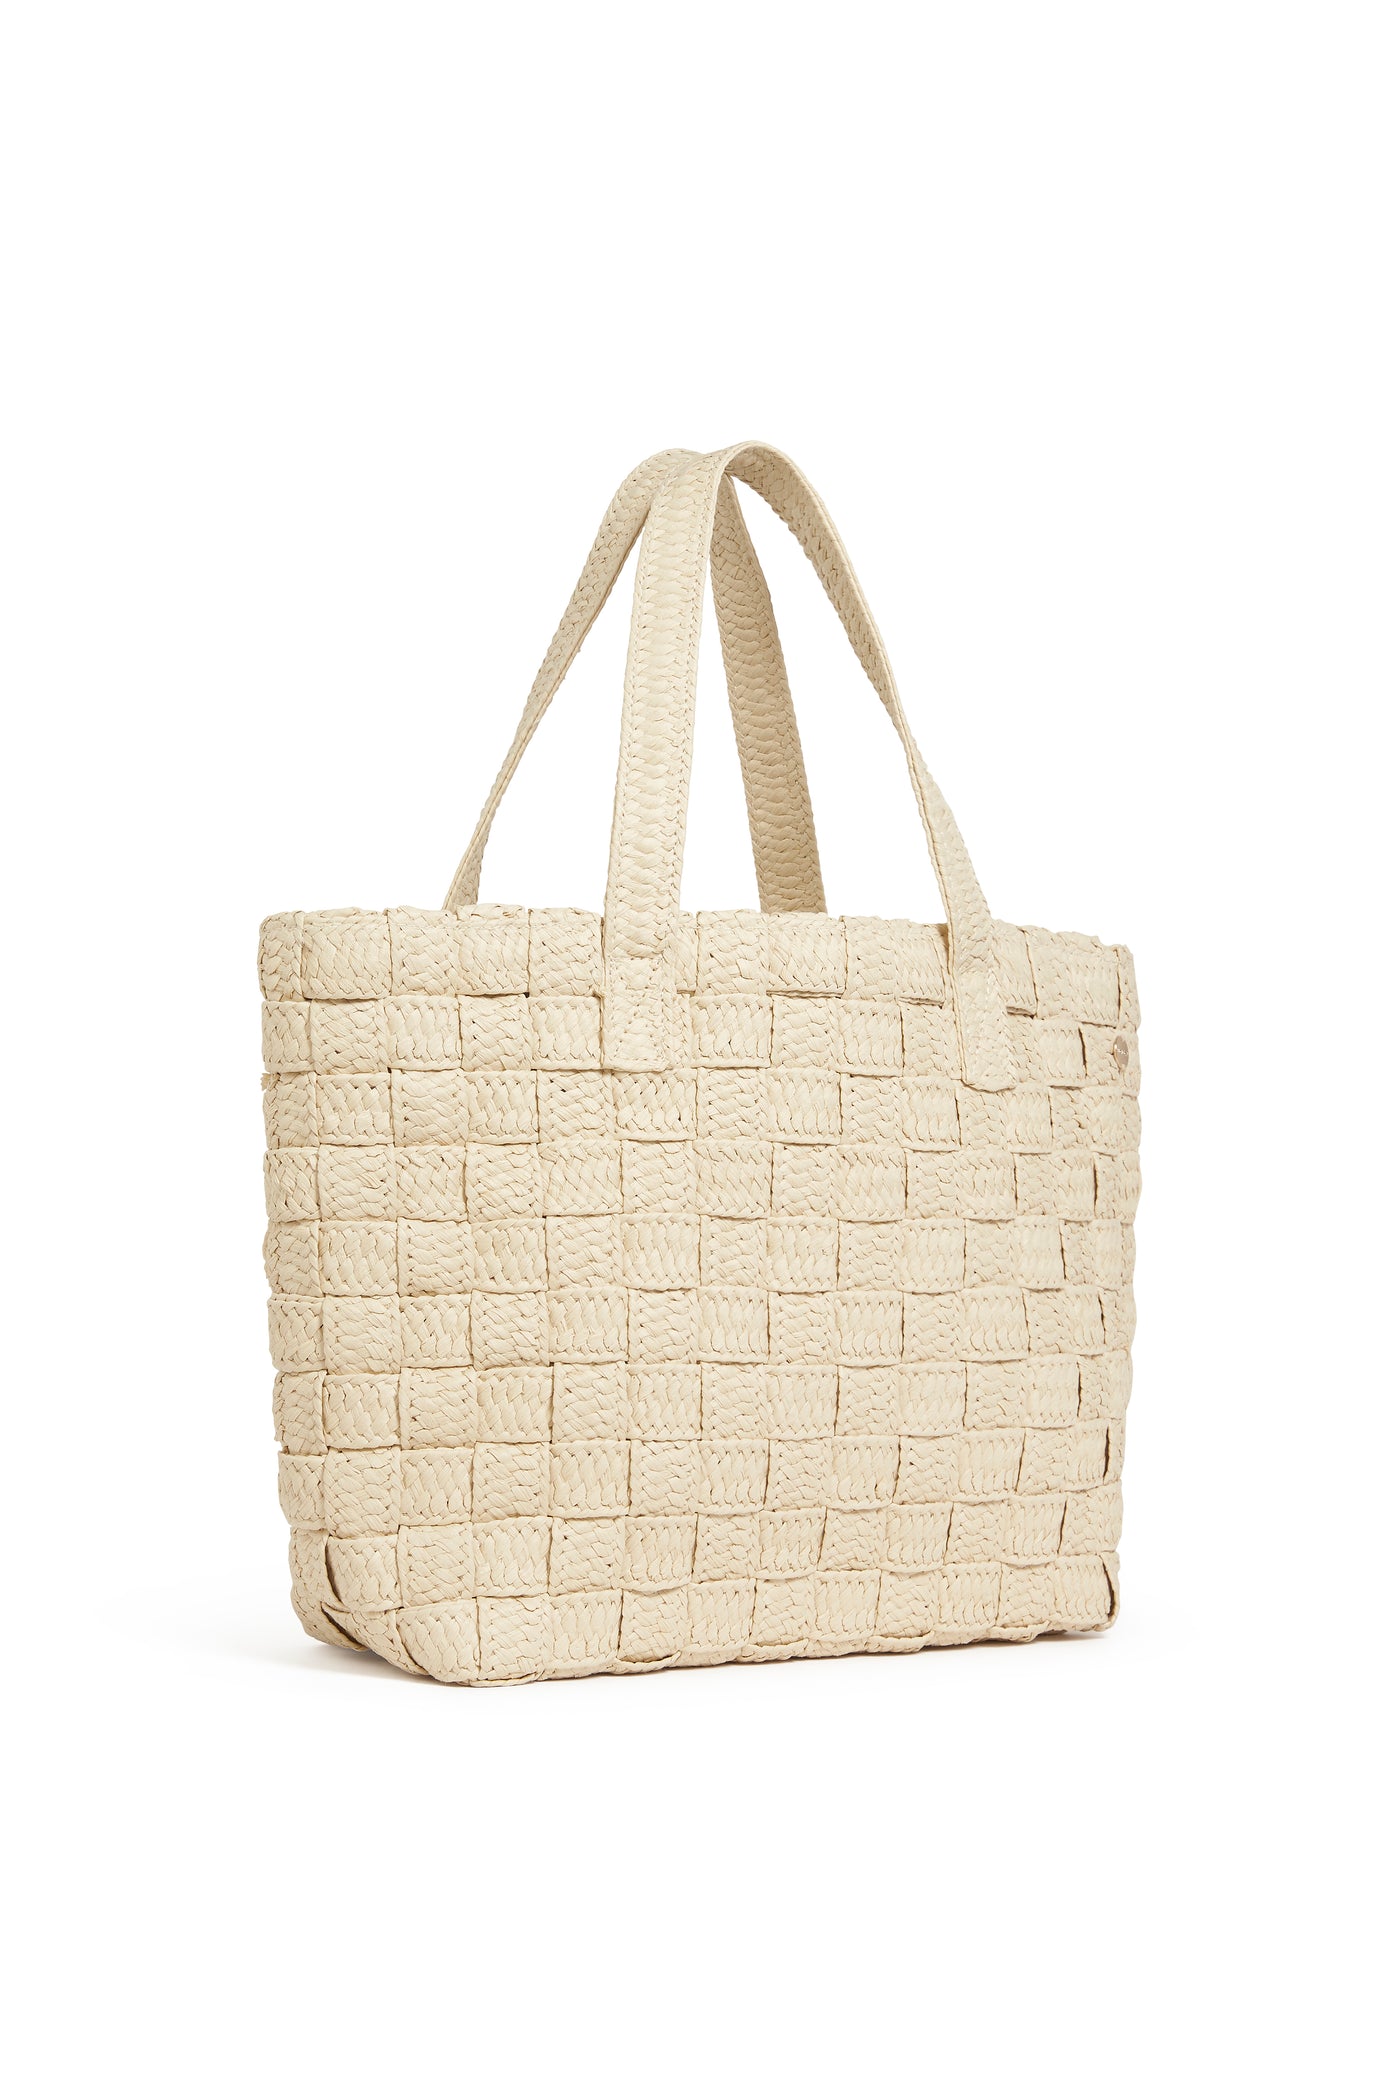 Seafolly Criss Cross Woven Tote